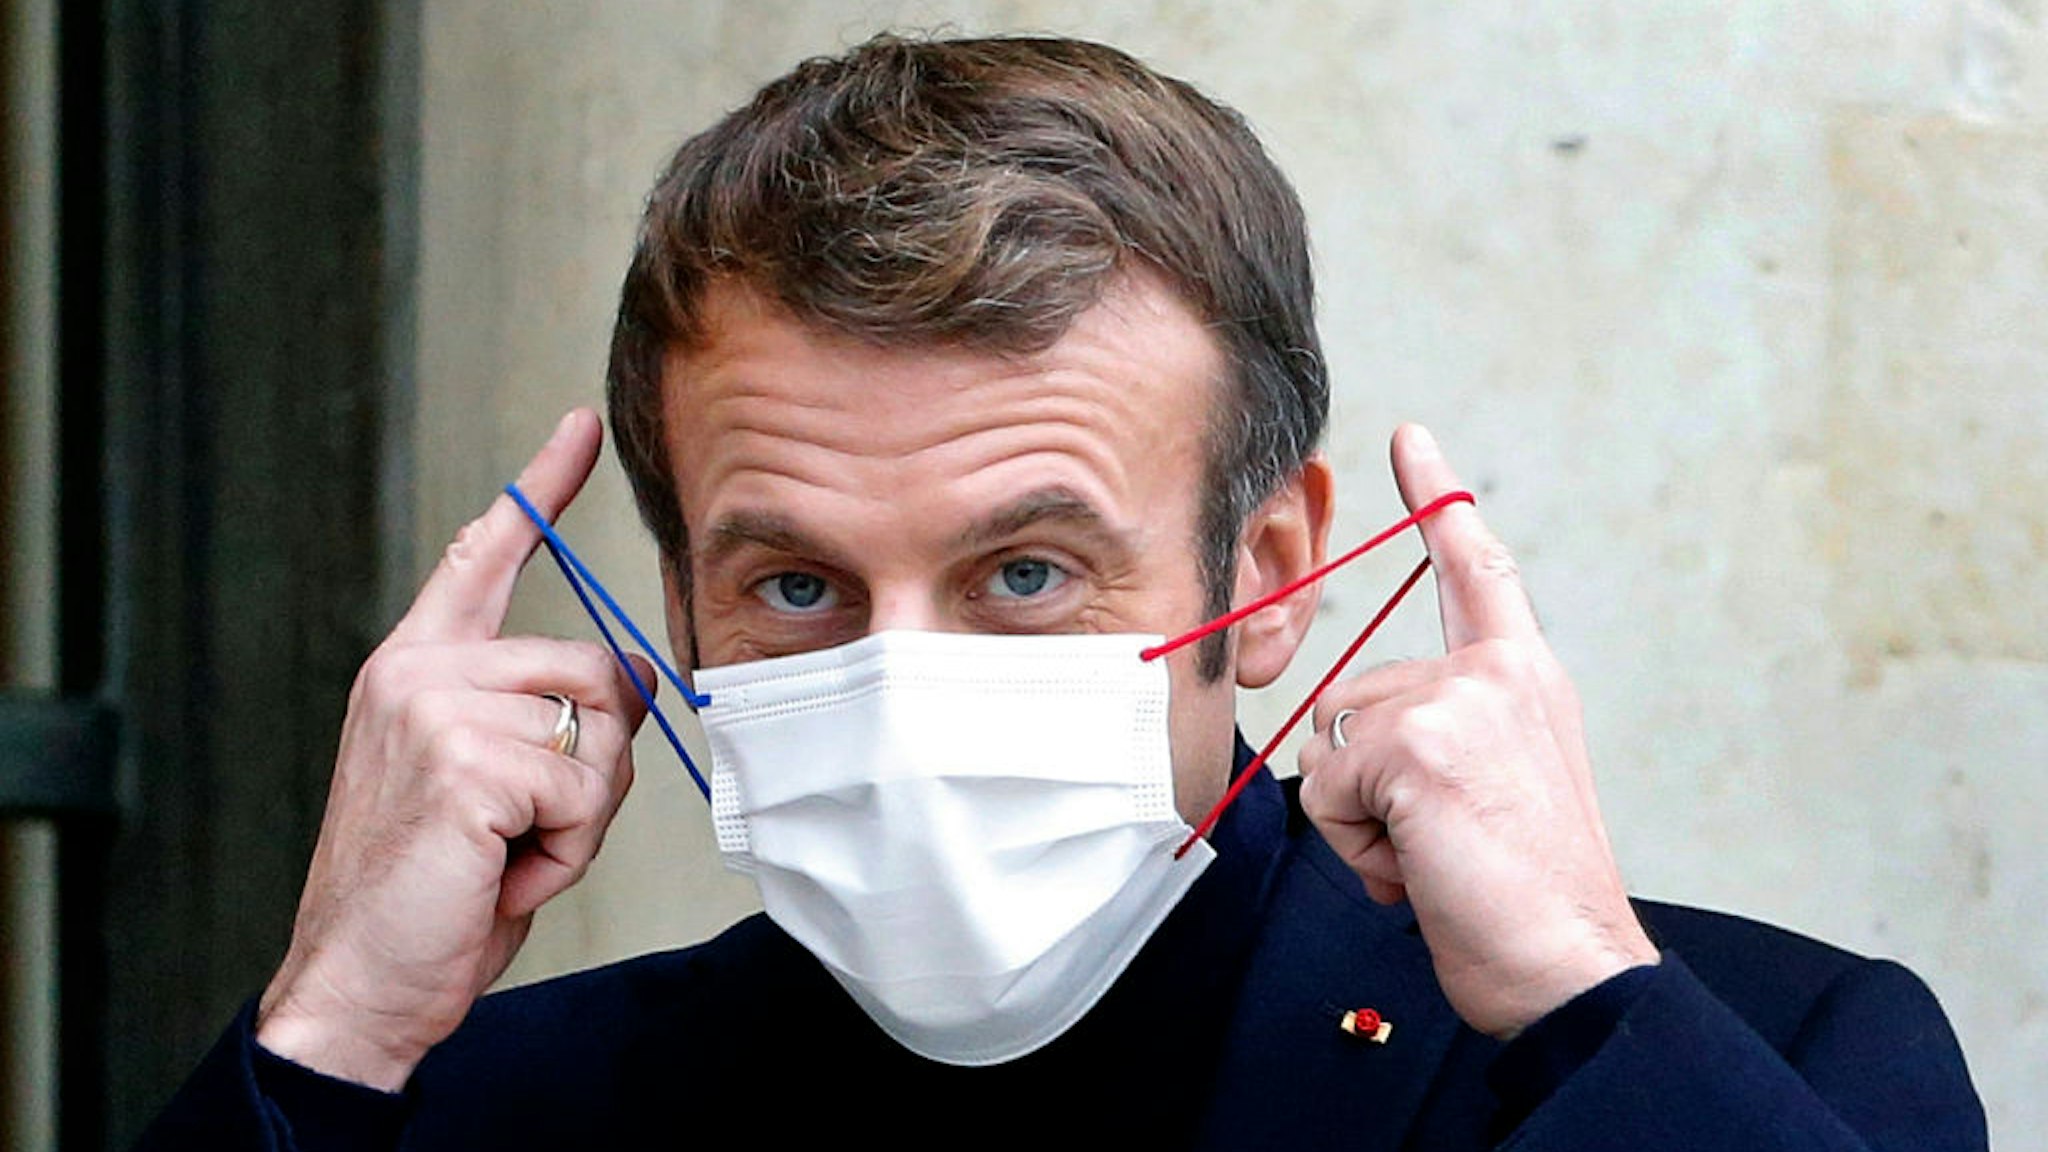 PARIS, FRANCE - DECEMBER 20: French President Emmanuel Macron takes off his protective face mask as he welcomes Rwanda's President Paul Kagame prior to their working lunch at the presidential Elysee Palace on December 20, 2021 in Paris, France. Emmanuel Macron receives Paul Kagame as part of the preparation for the summit between the European Union and the African Union to be held in February 2022 in Brussels. (Photo by Chesnot/Getty Images)